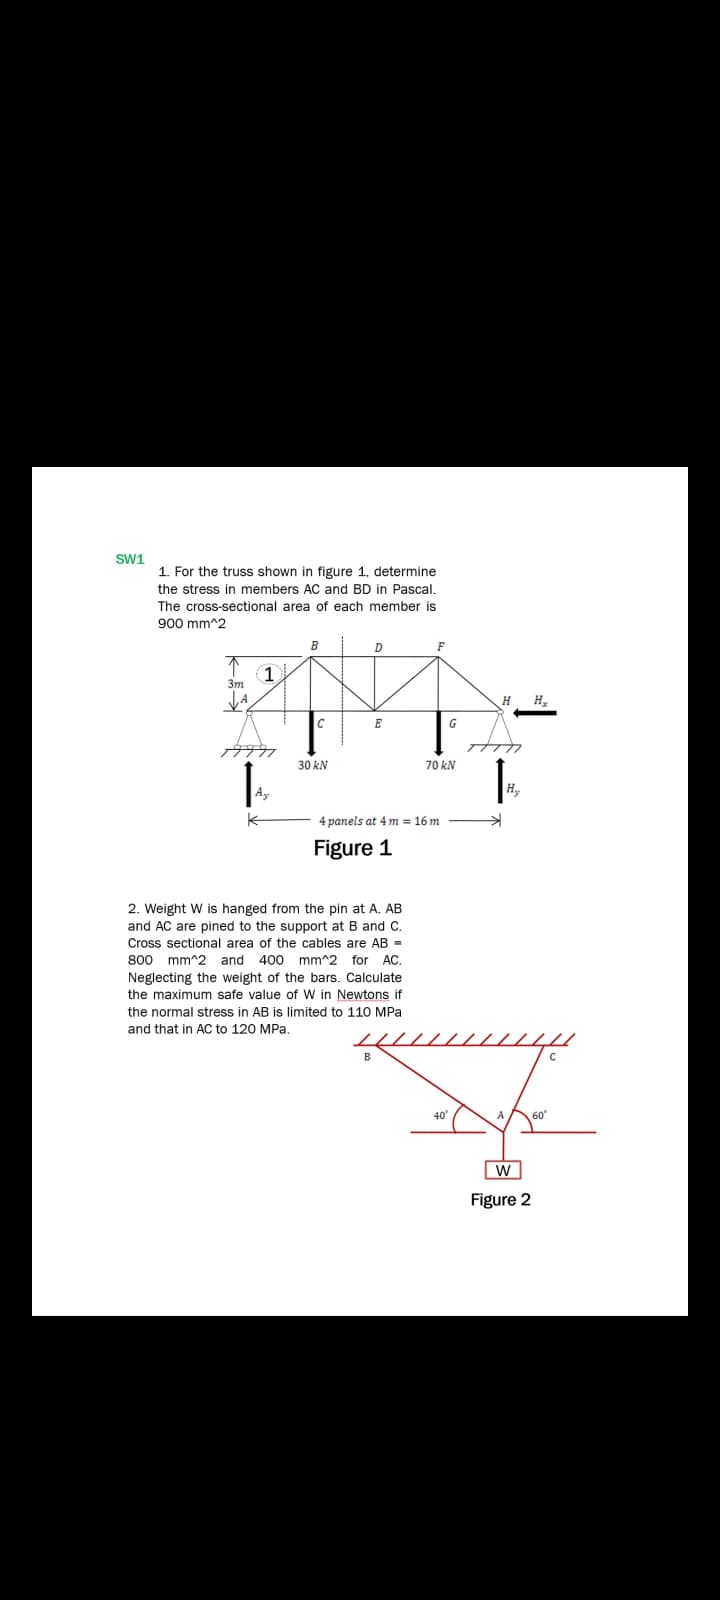 SW1
1. For the truss shown in figure 1, determine
the stress in members AC and BD in Pascal.
The cross-sectional area of each member is
900 mm^2
B
F
不
(1
3m
H
E
G
30 kN
70 kN
Ay
Hy
4 panels at 4 m = 16 m
Figure 1
2. Weight W is hanged from the pin at A. AB
and AC are pined to the support at B and C.
Cross sectional area of the cables are AB =
800 mm^2 and 400 mm^2 for AC.
Neglecting the weight of the bars. Calculate
the maximum safe value of W in Newtons if
the normal stress in AB is limited to 11O MPa
and that in AC to 120 MPa.
40
A
Figure 2
